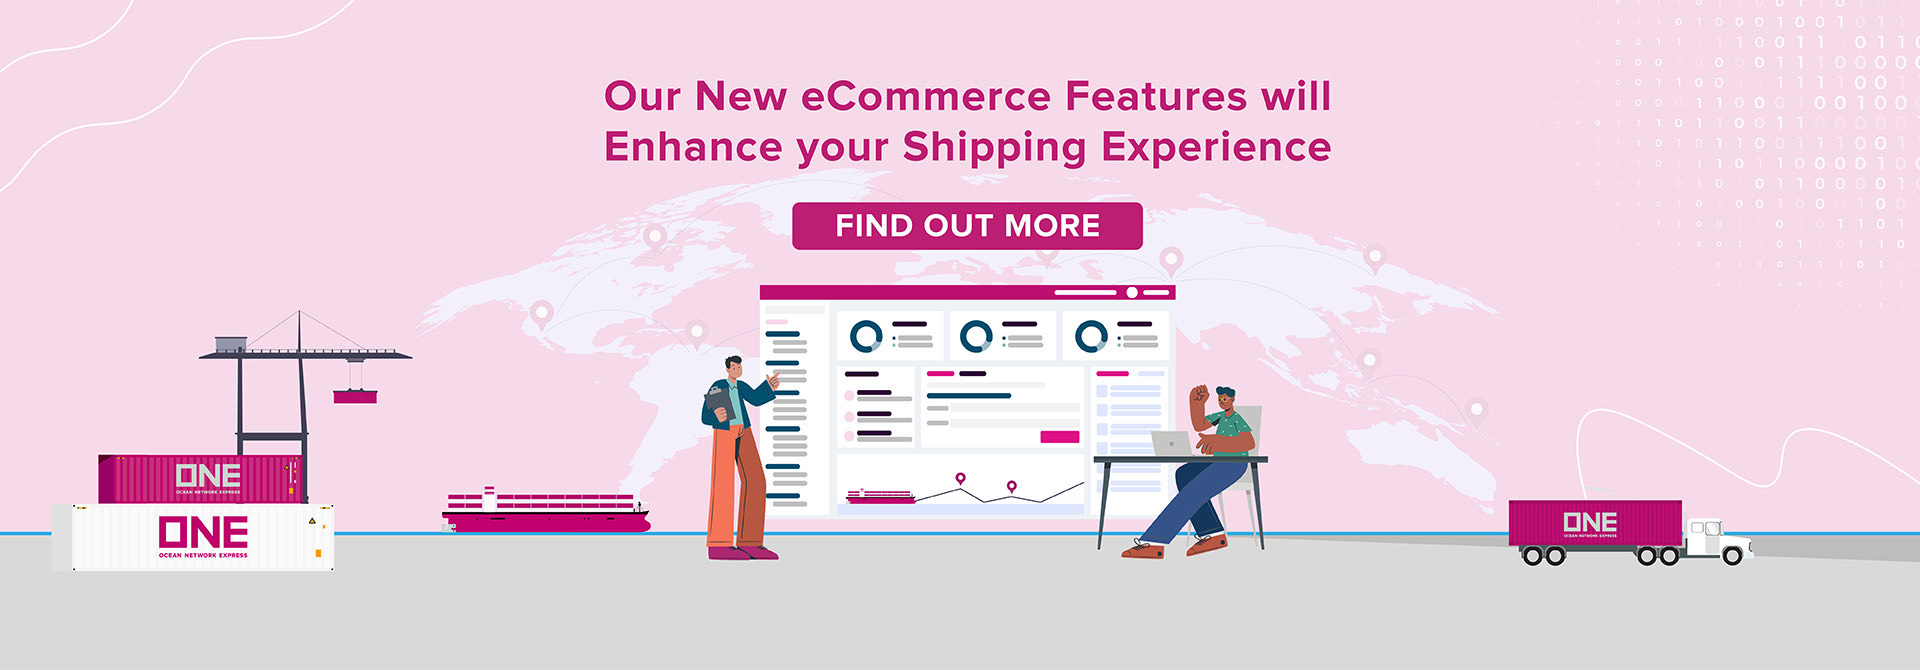 Our new eCommerce Featuers will Enhance your Shipping Experience